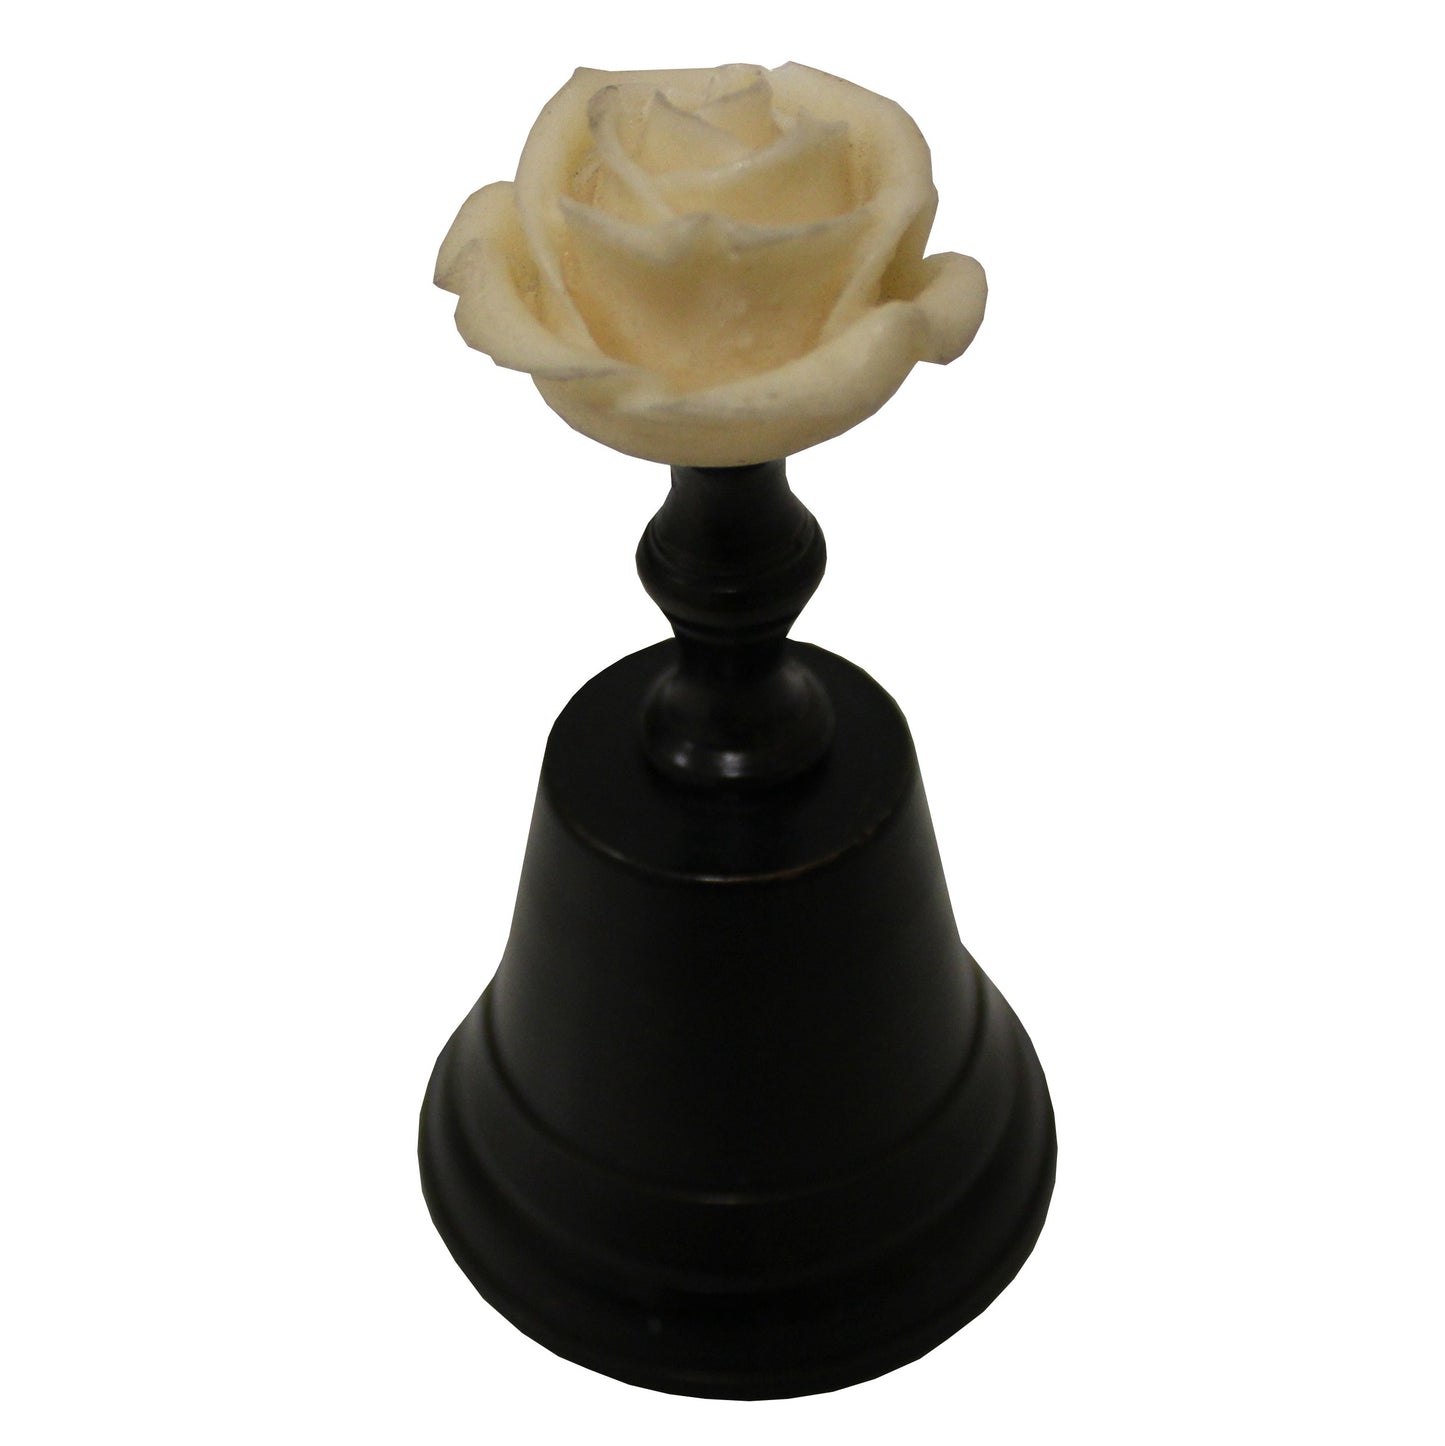 Vintage bell with a white rose